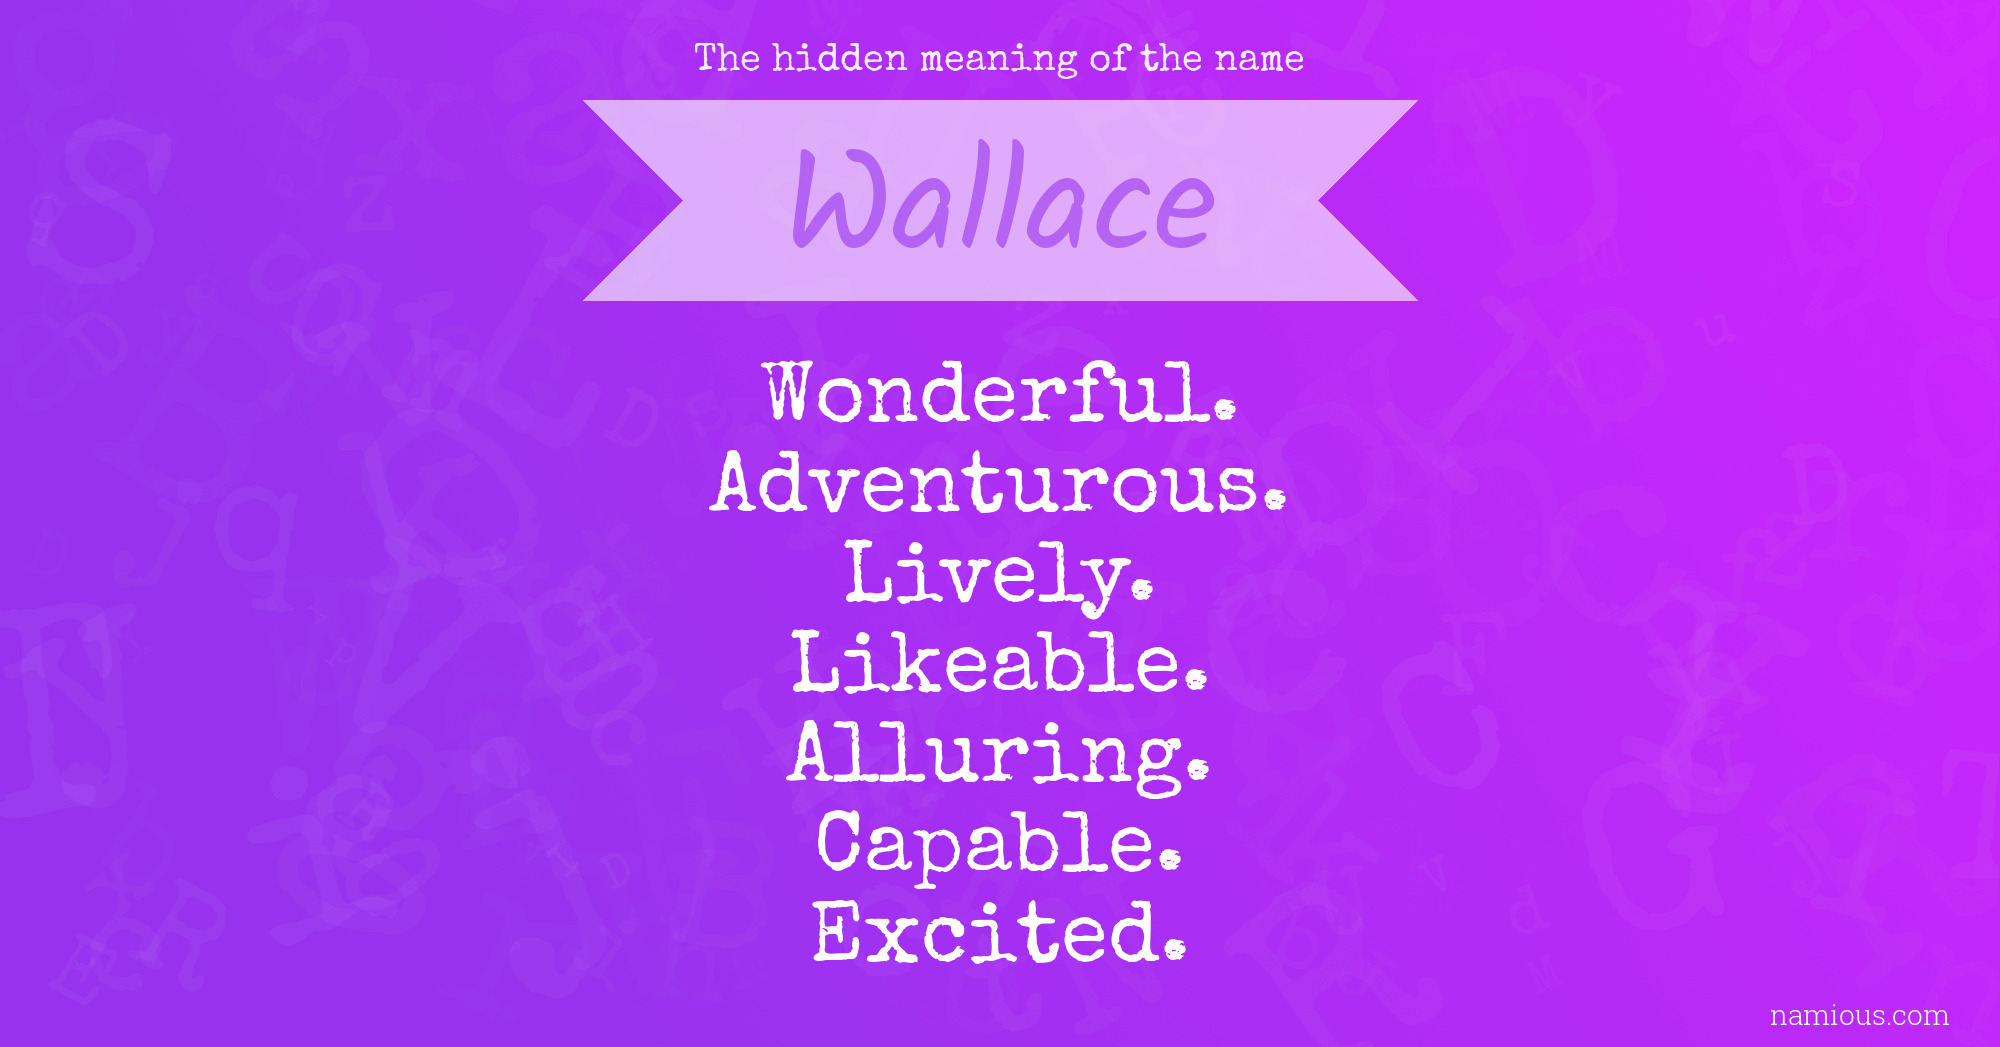 The hidden meaning of the name Wallace